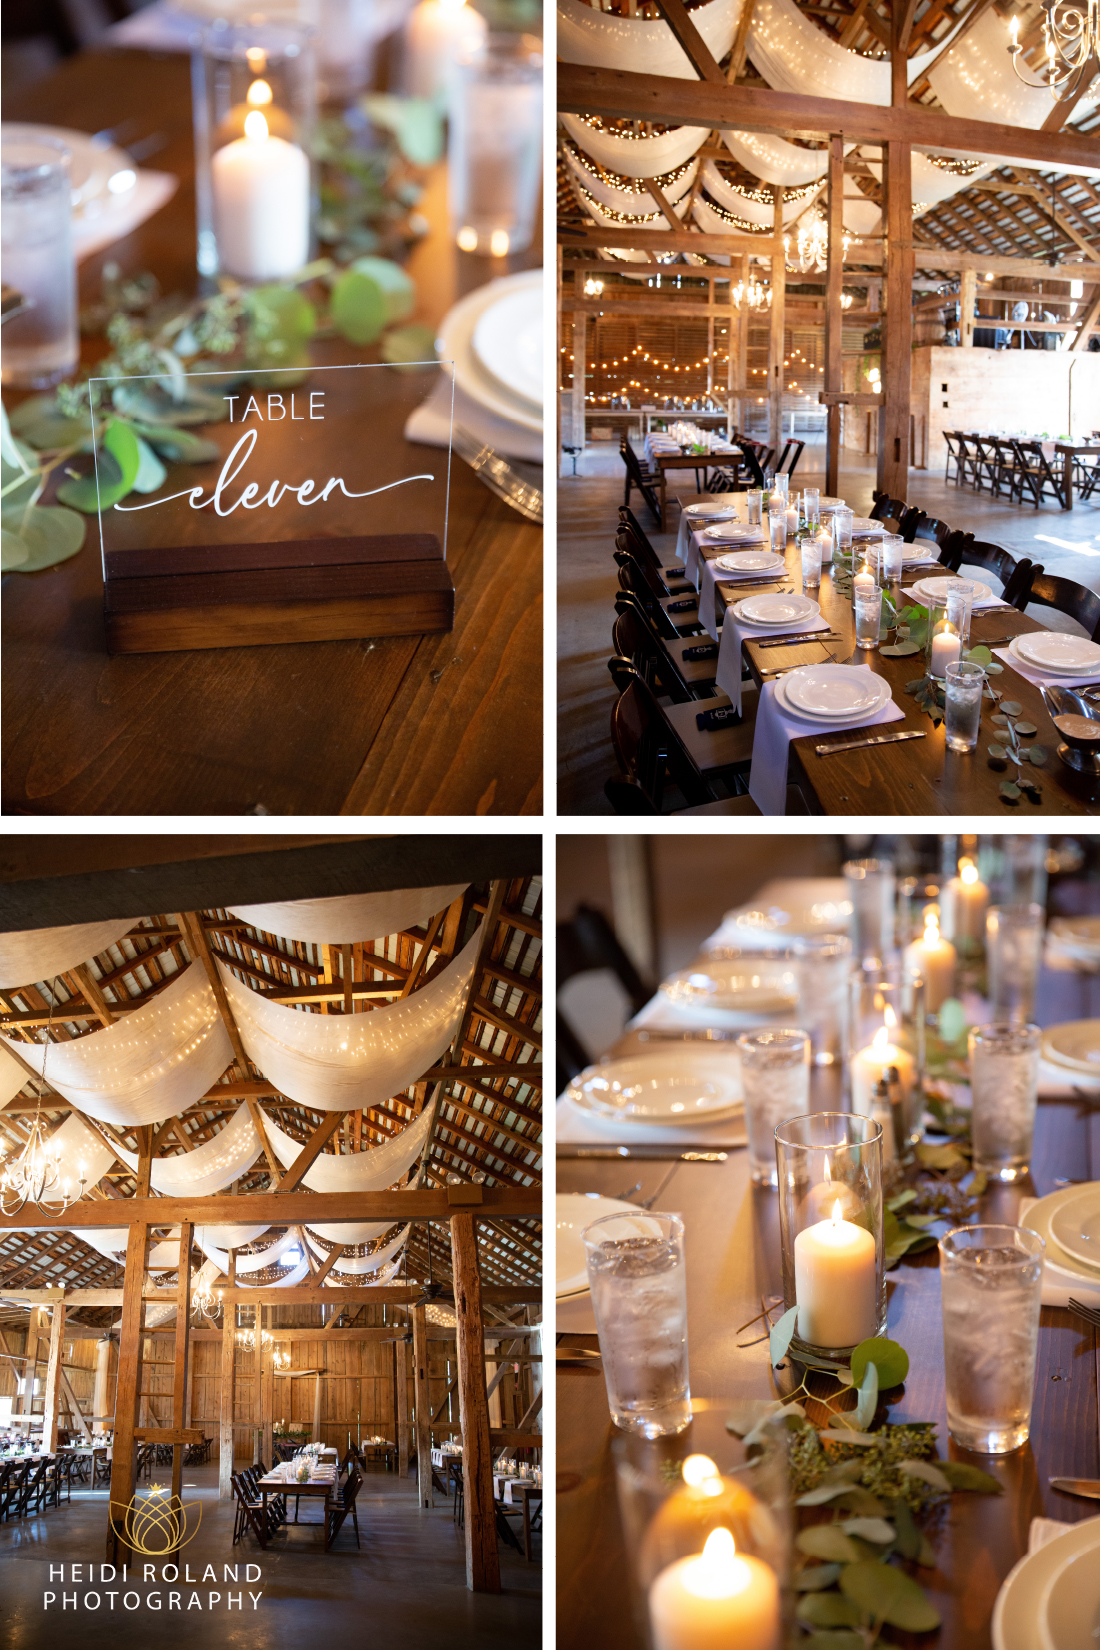 Stoltzfus homestead rustic barn reception details, candles and table numbers